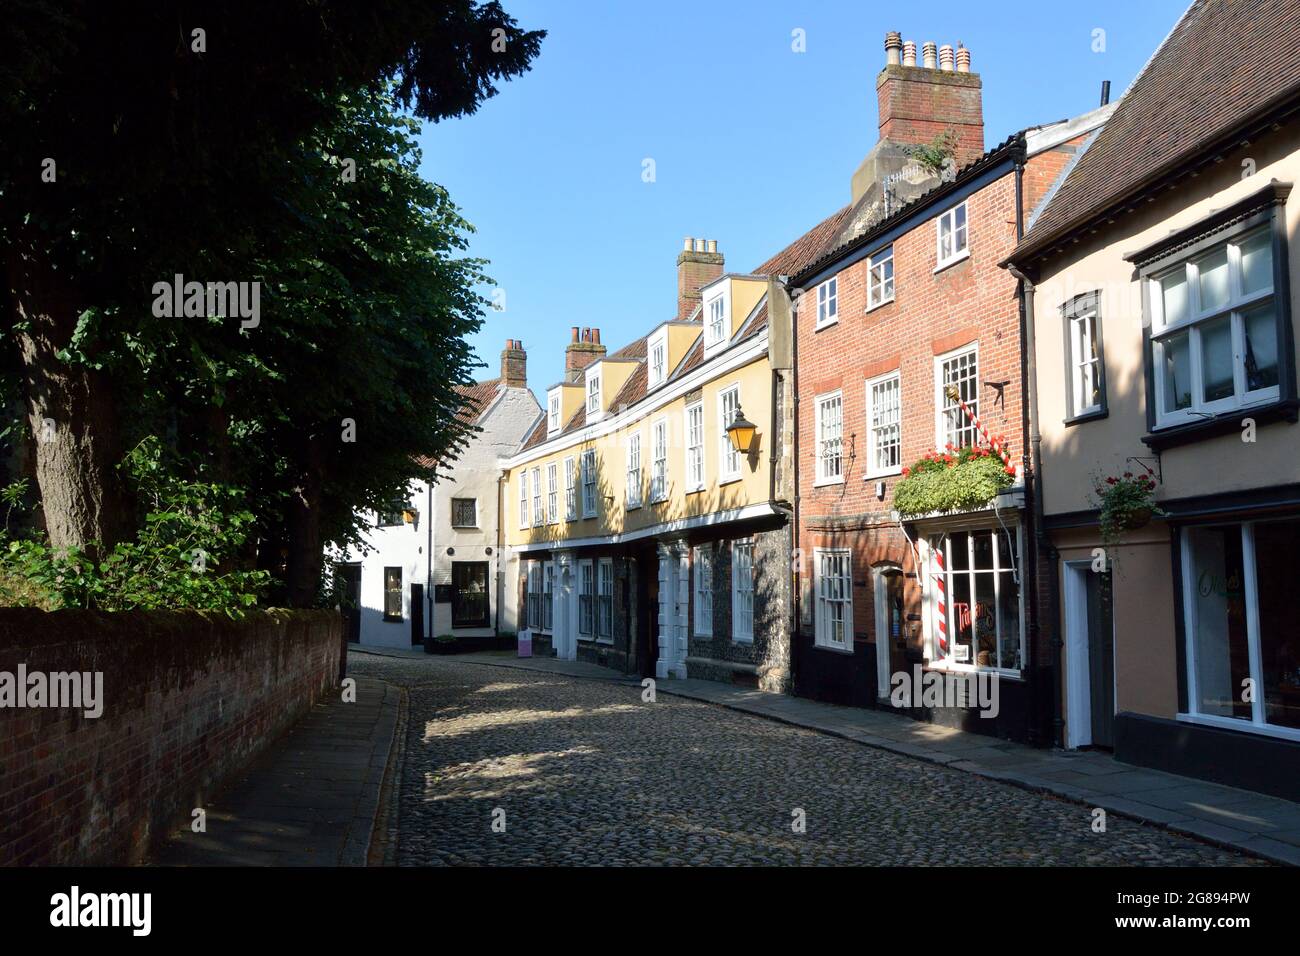 Looking up historic Elm Hill, Norwich, location for the Netflix movie 'Jingle Jangle: A Christmas Journey' Stock Photo